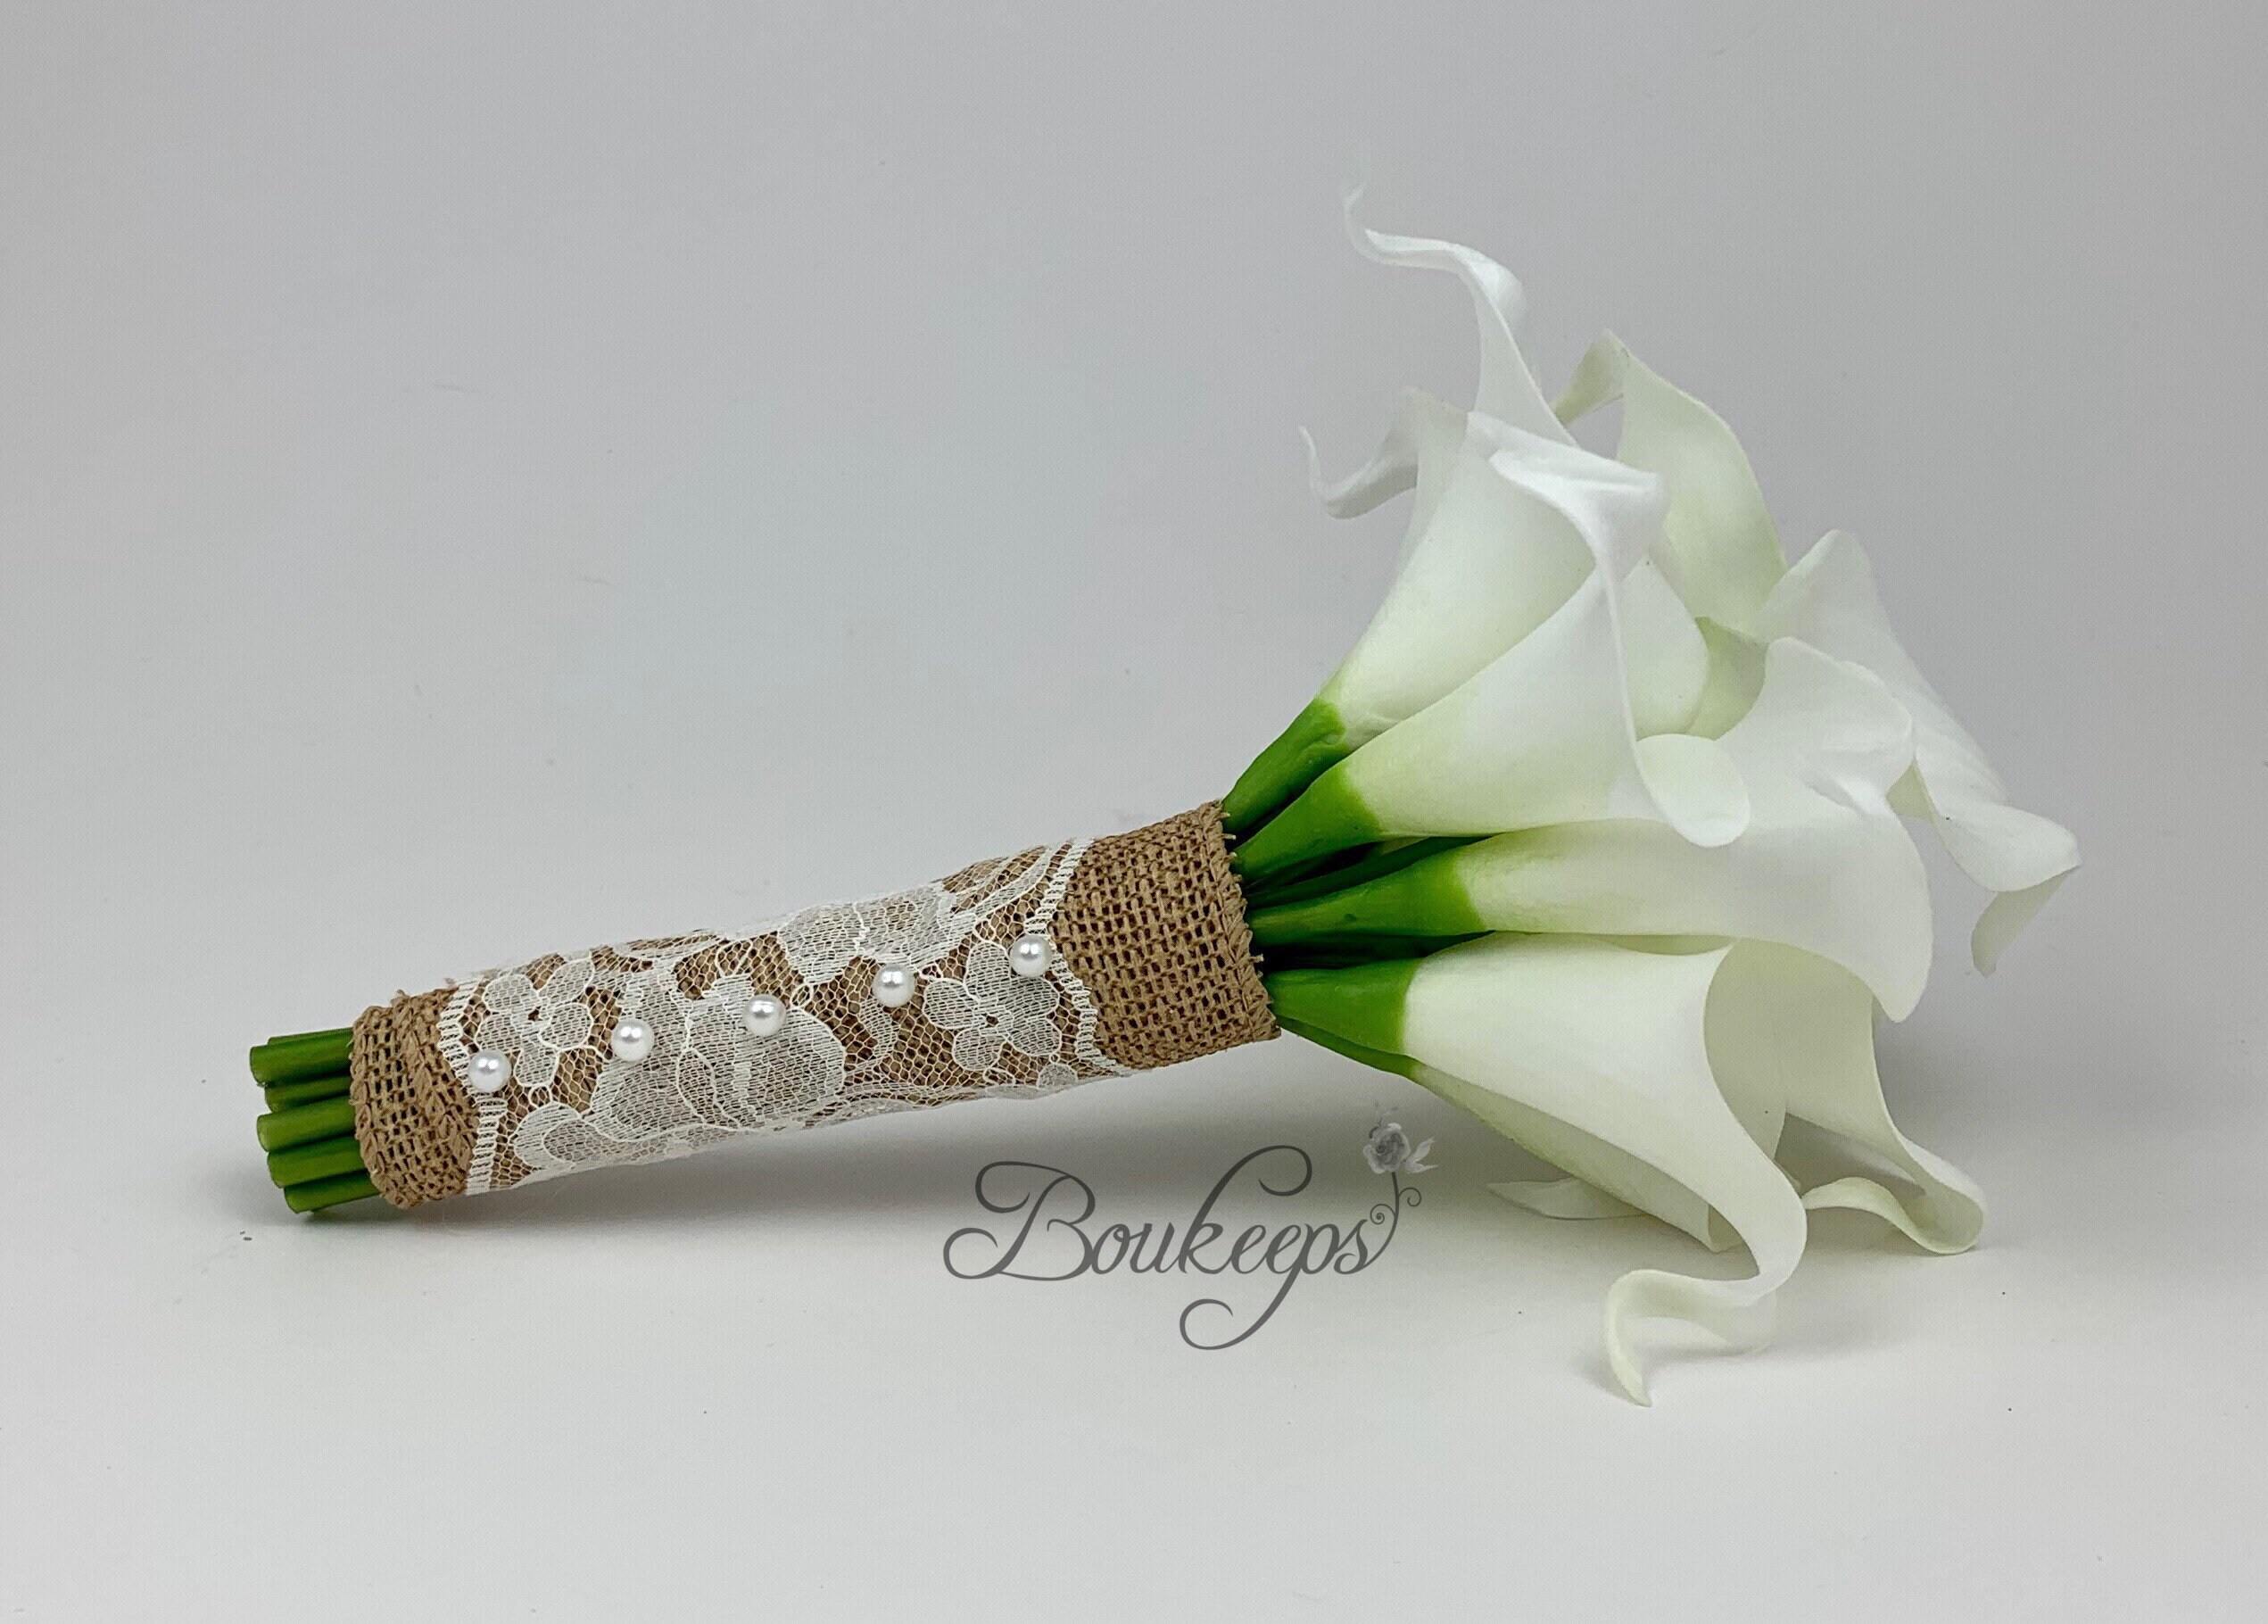 Choose Calla Lily Color Blush Calla Lily Bouquet With Burlap and Ivory  Lace, Calla Lily Bridal Bouquet, Bridesmaid, Wedding, Pearls 